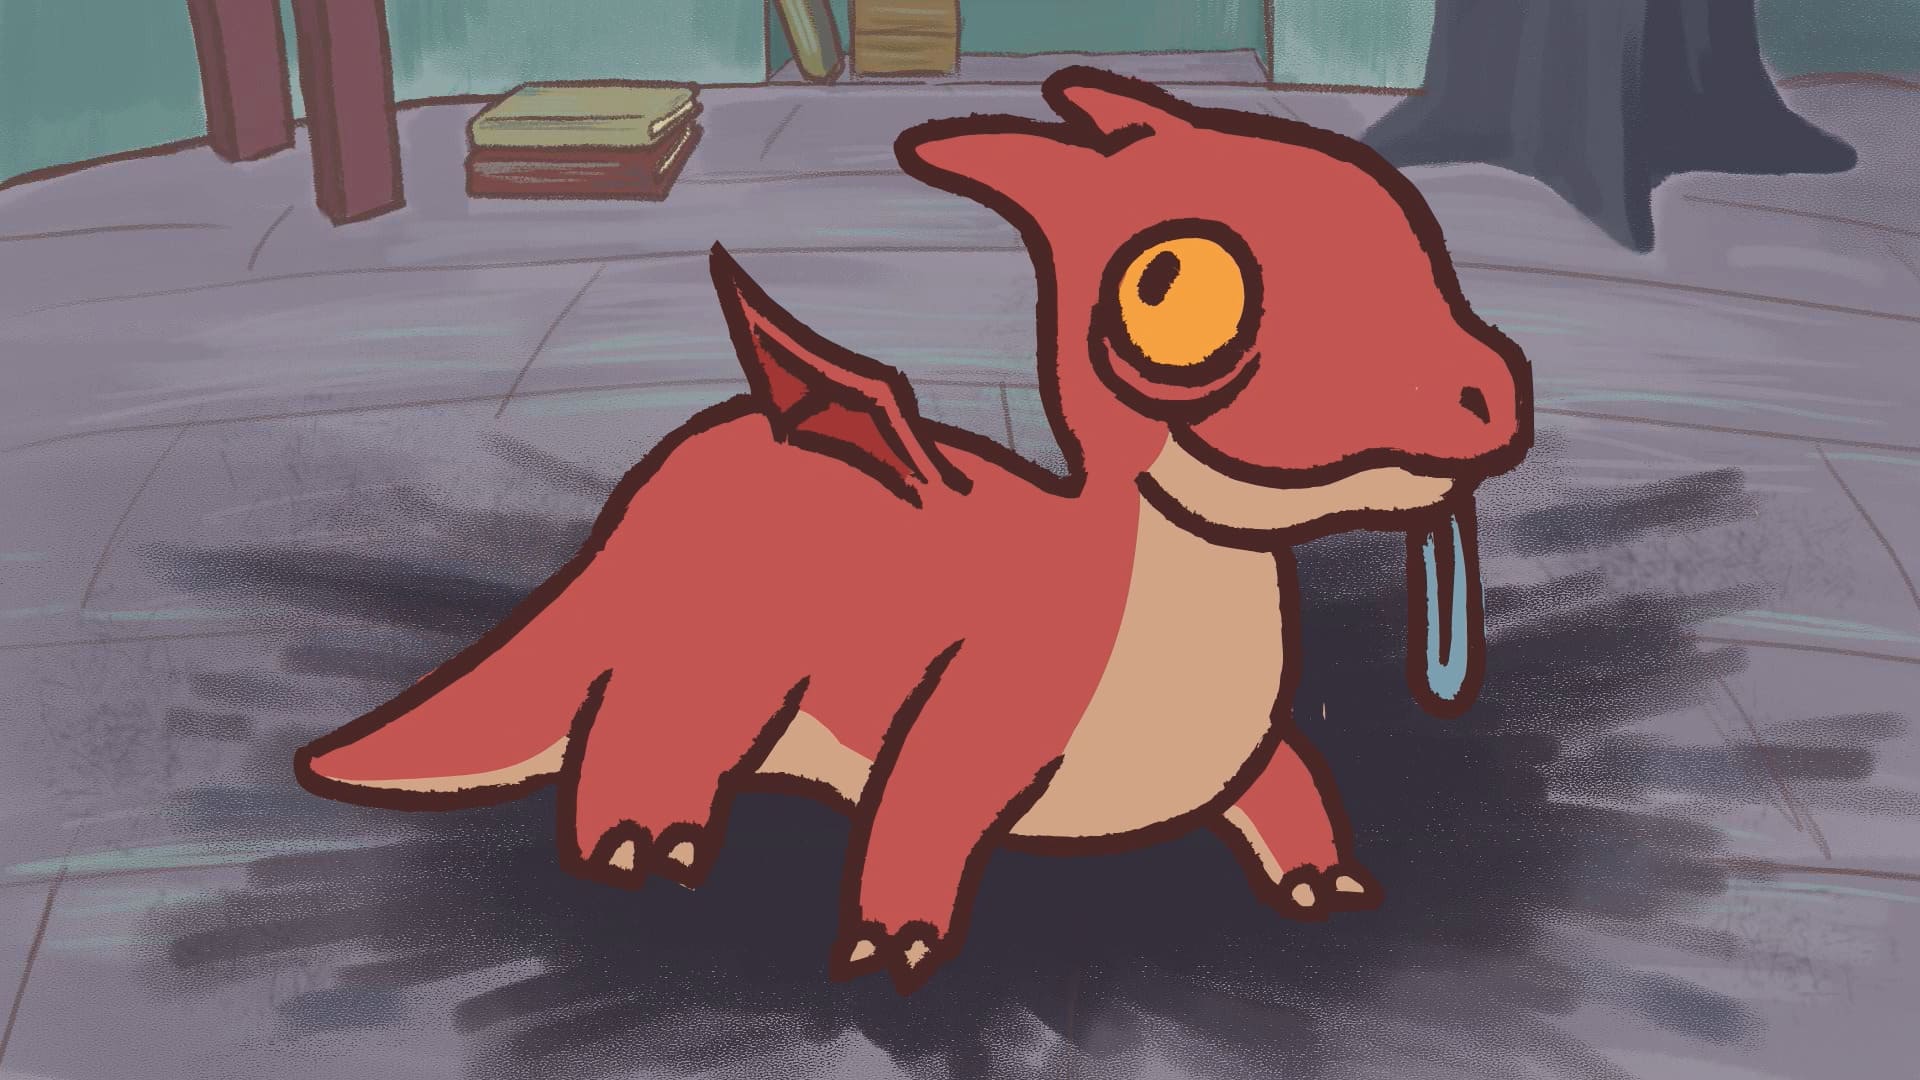 A pastel red baby dragon is depicted, with big yellow eyes and small, inexperienced wings.